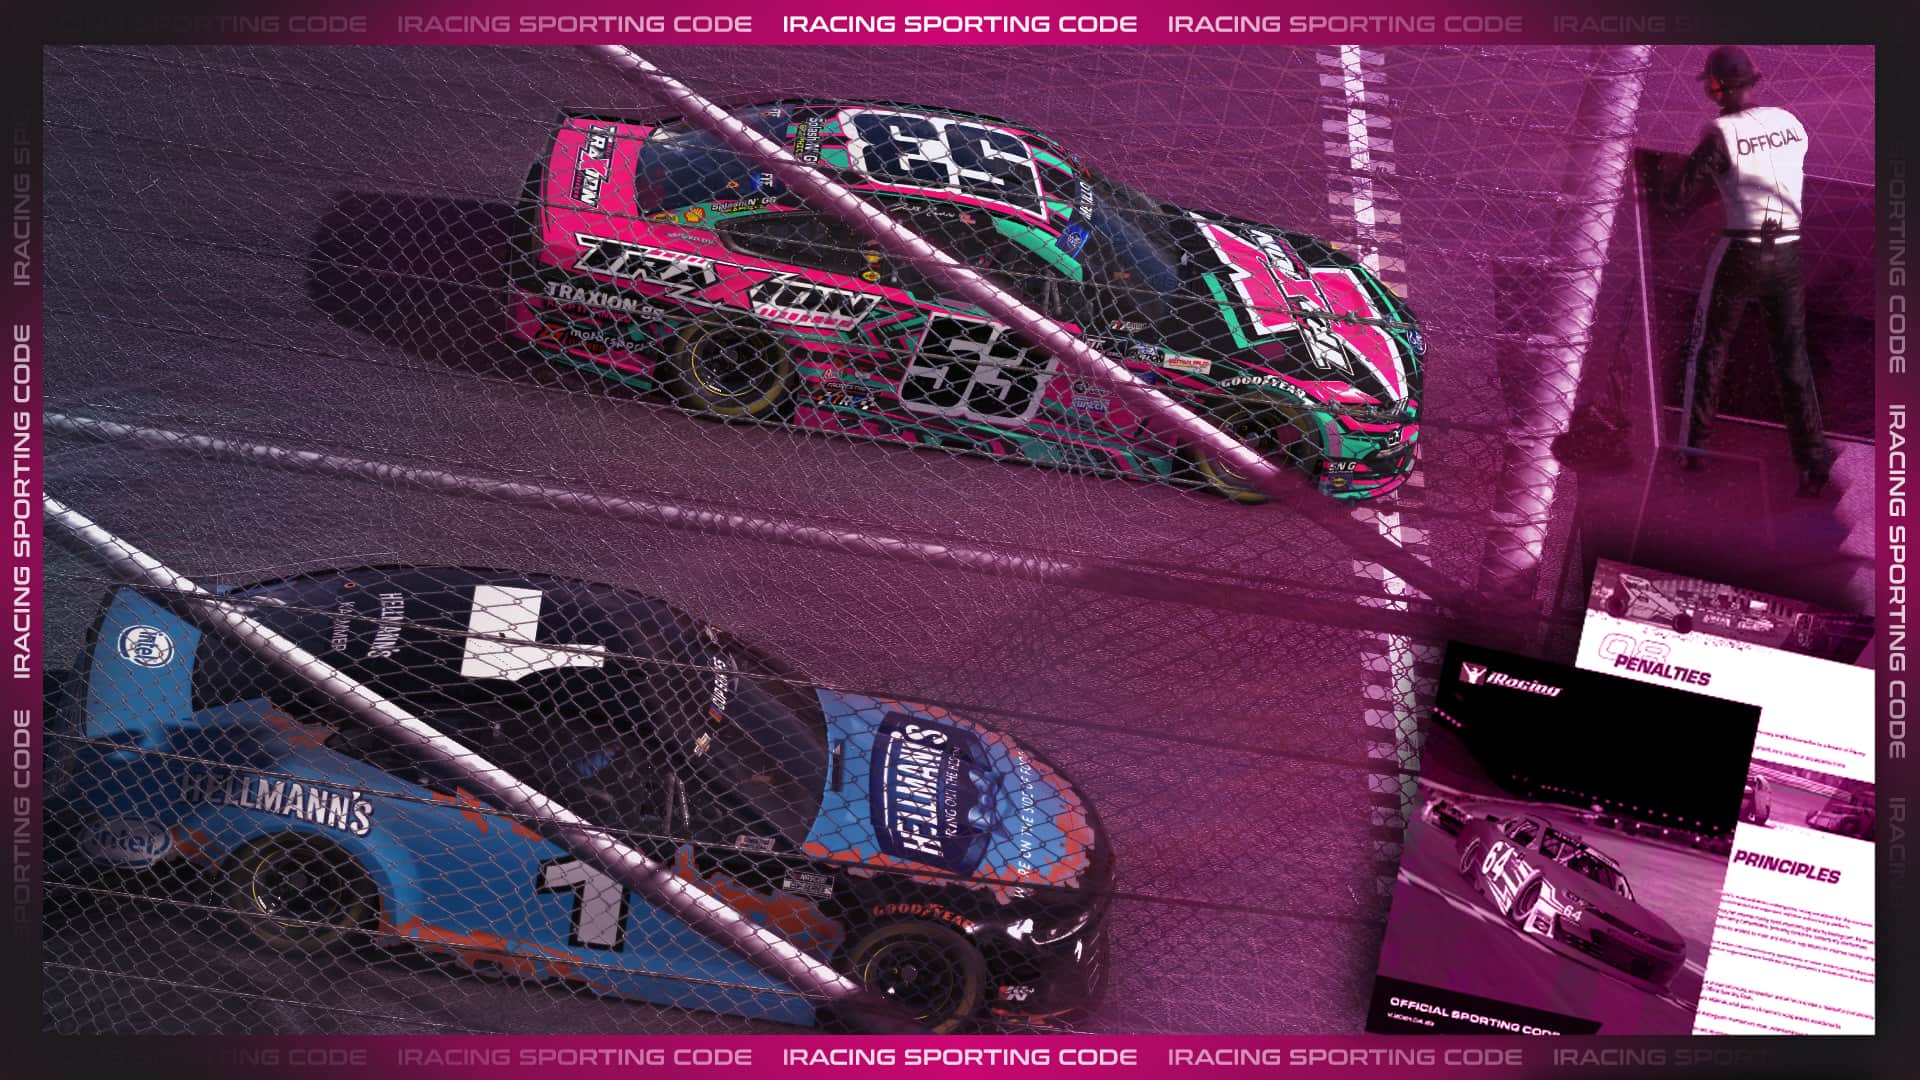 An in-depth look at iRacing's Sporting Code